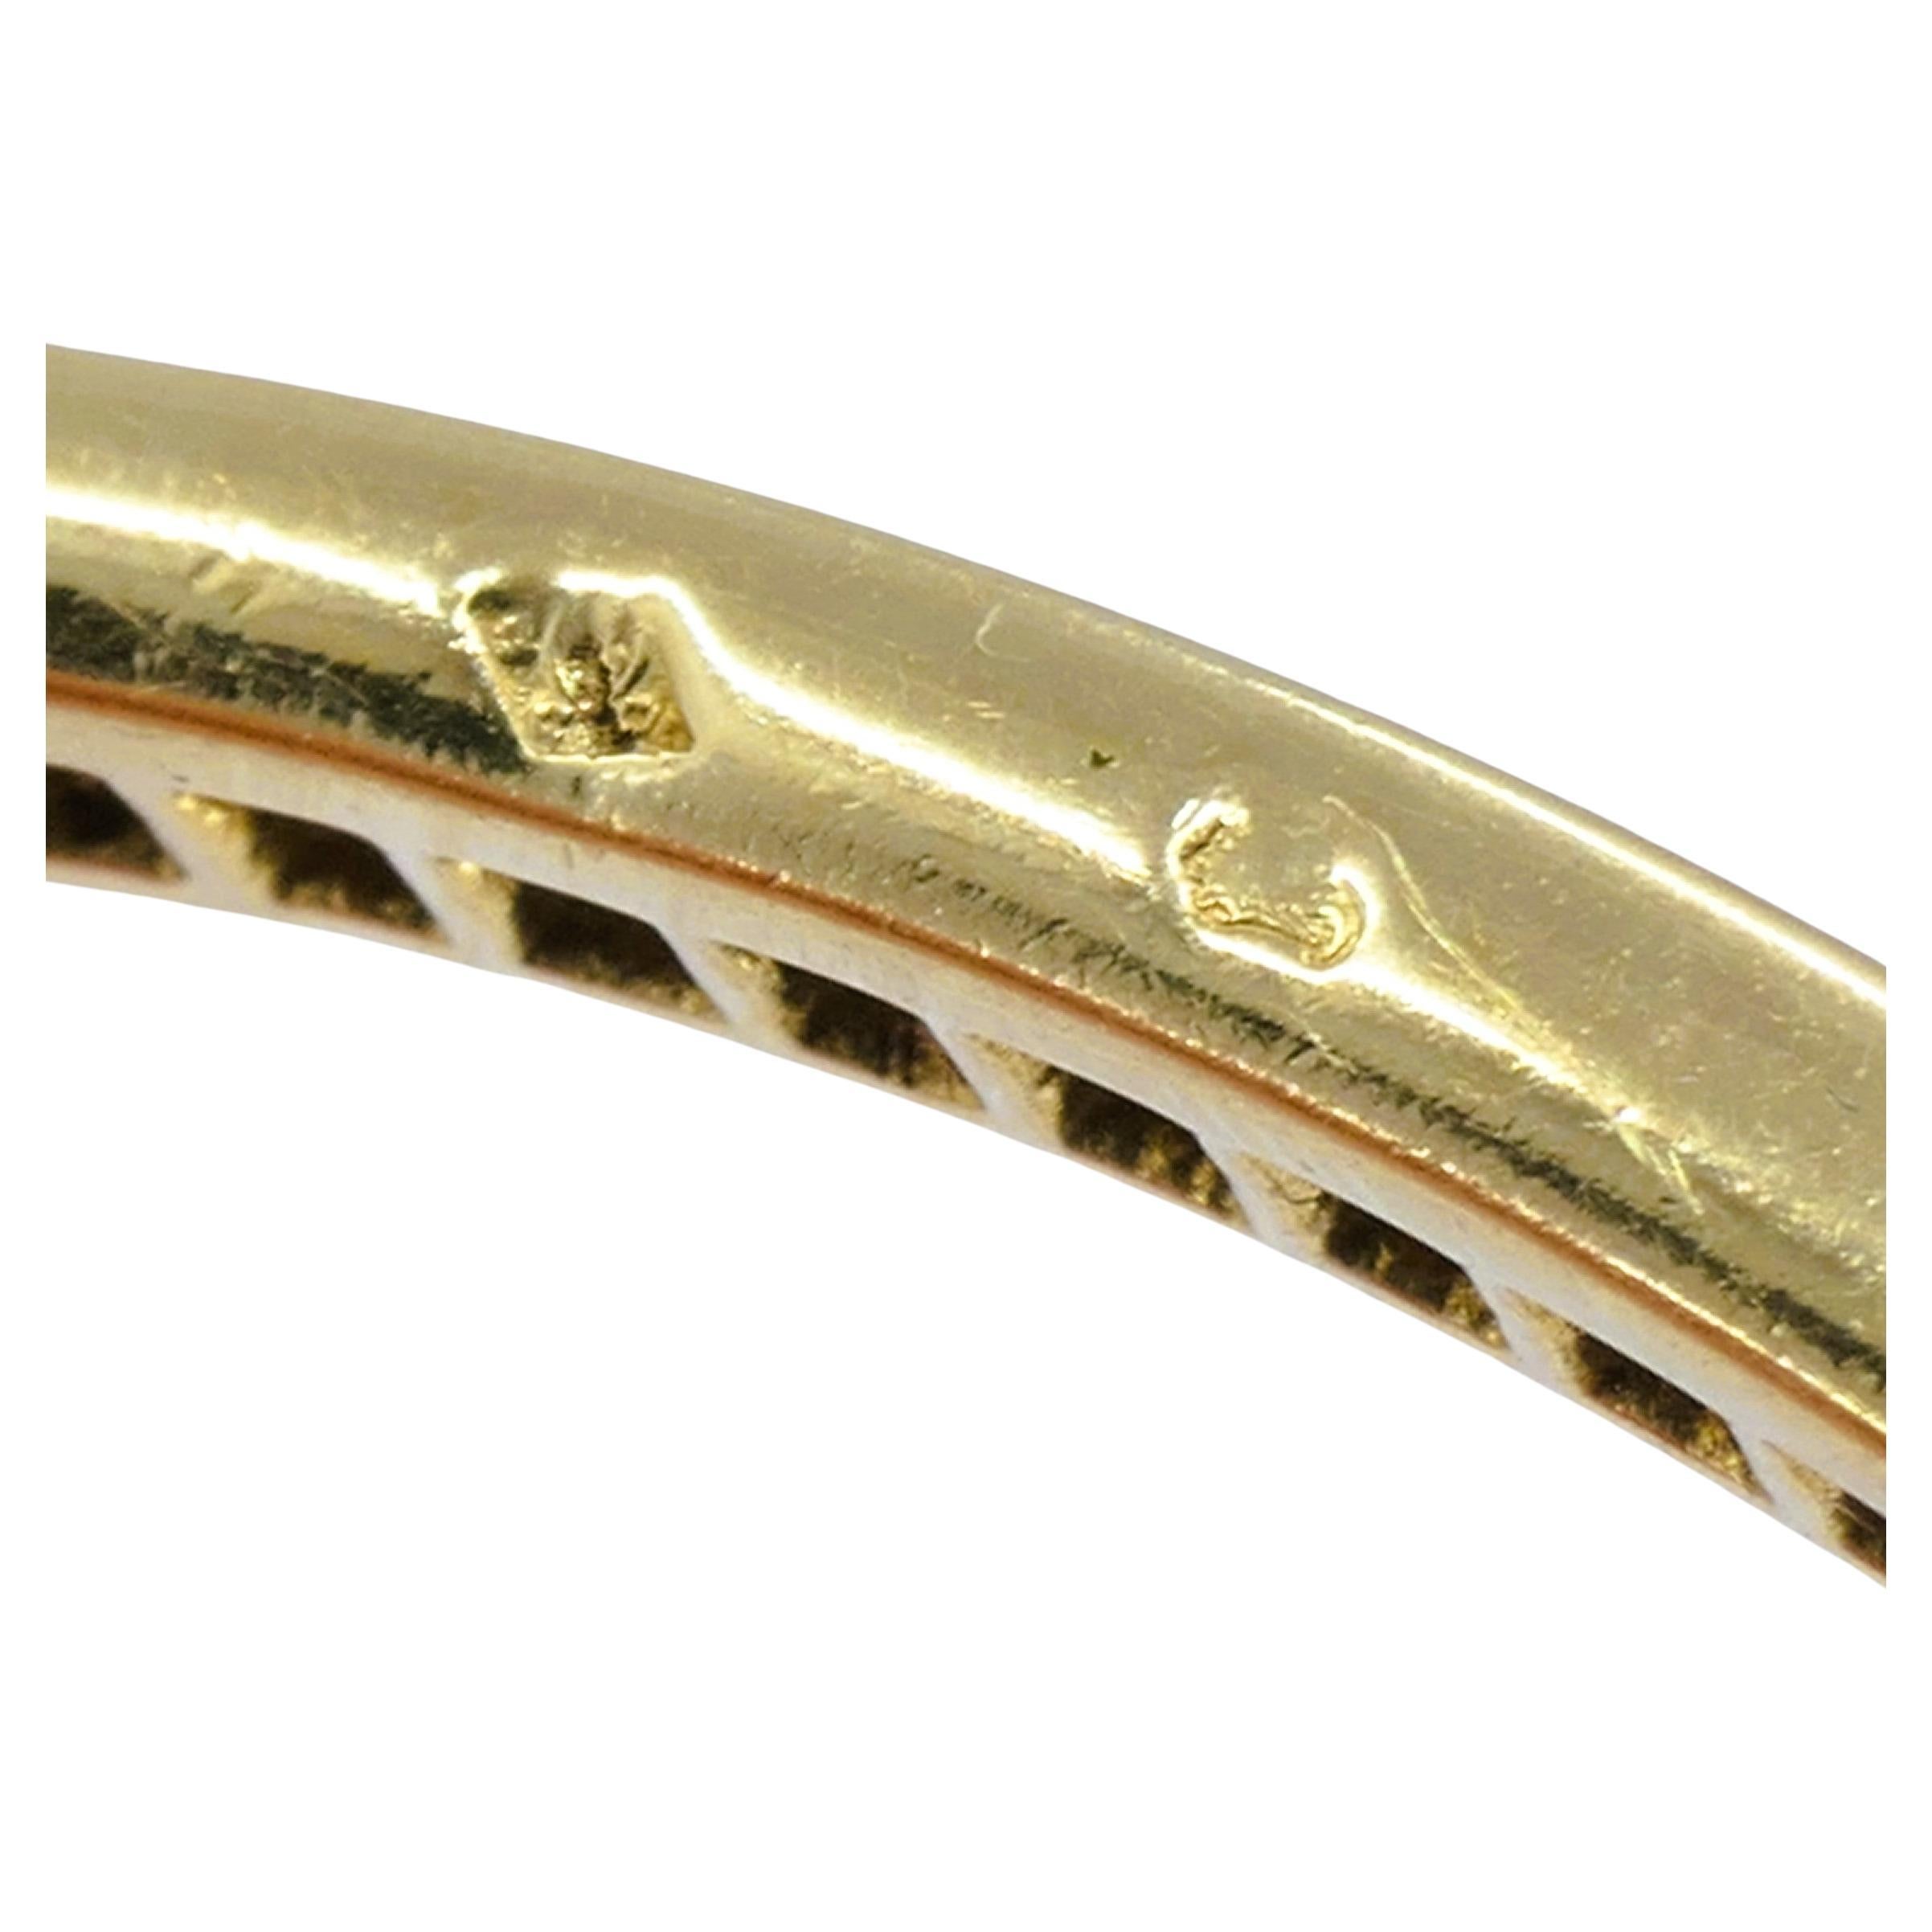 Cartier Trinity Bracelet Diamond 18k Gold Estate Jewelry In Excellent Condition For Sale In Beverly Hills, CA